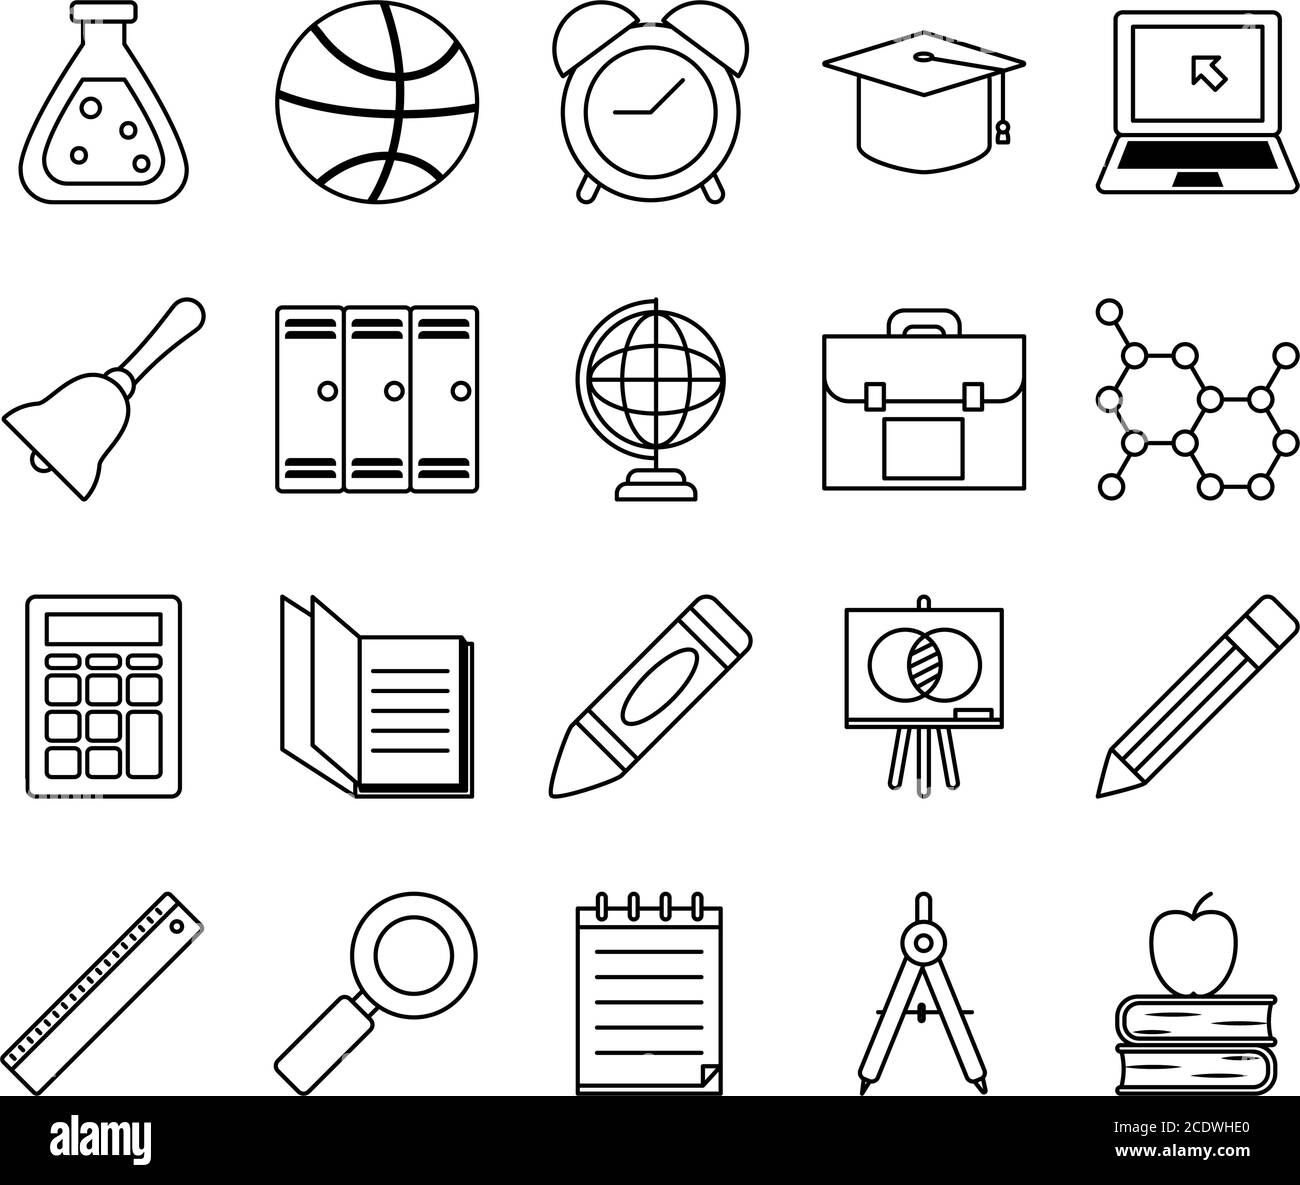 graduation cap and school icon set over white background, line style, vector illustration Stock Vector